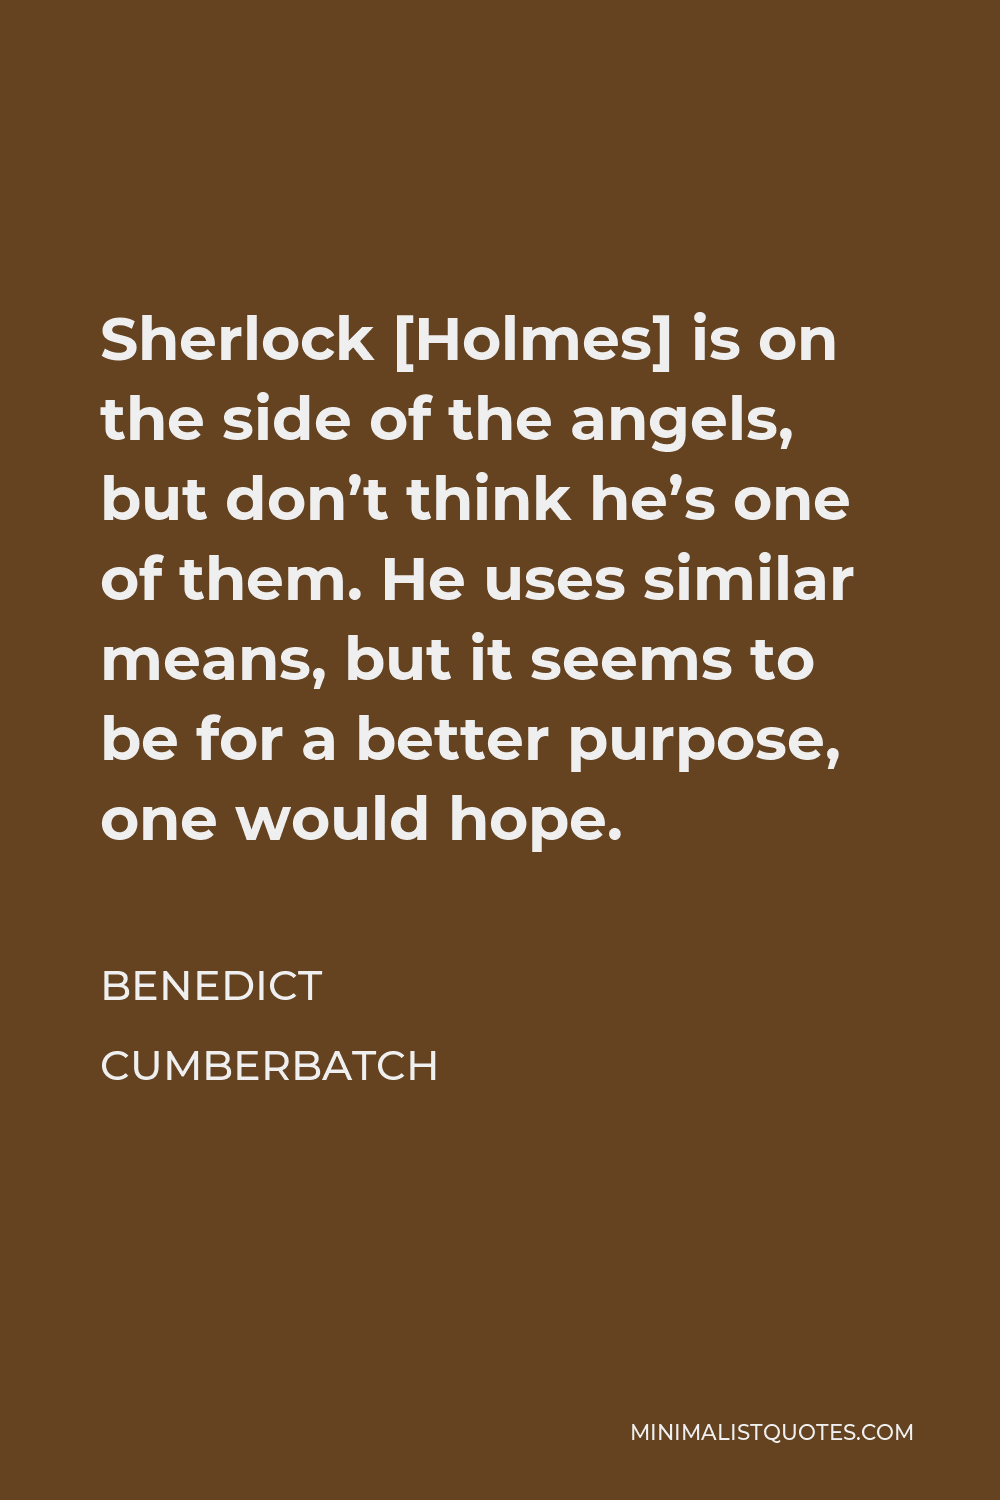 Benedict Cumberbatch Quote - Sherlock [Holmes] is on the side of the angels, but don’t think he’s one of them. He uses similar means, but it seems to be for a better purpose, one would hope.